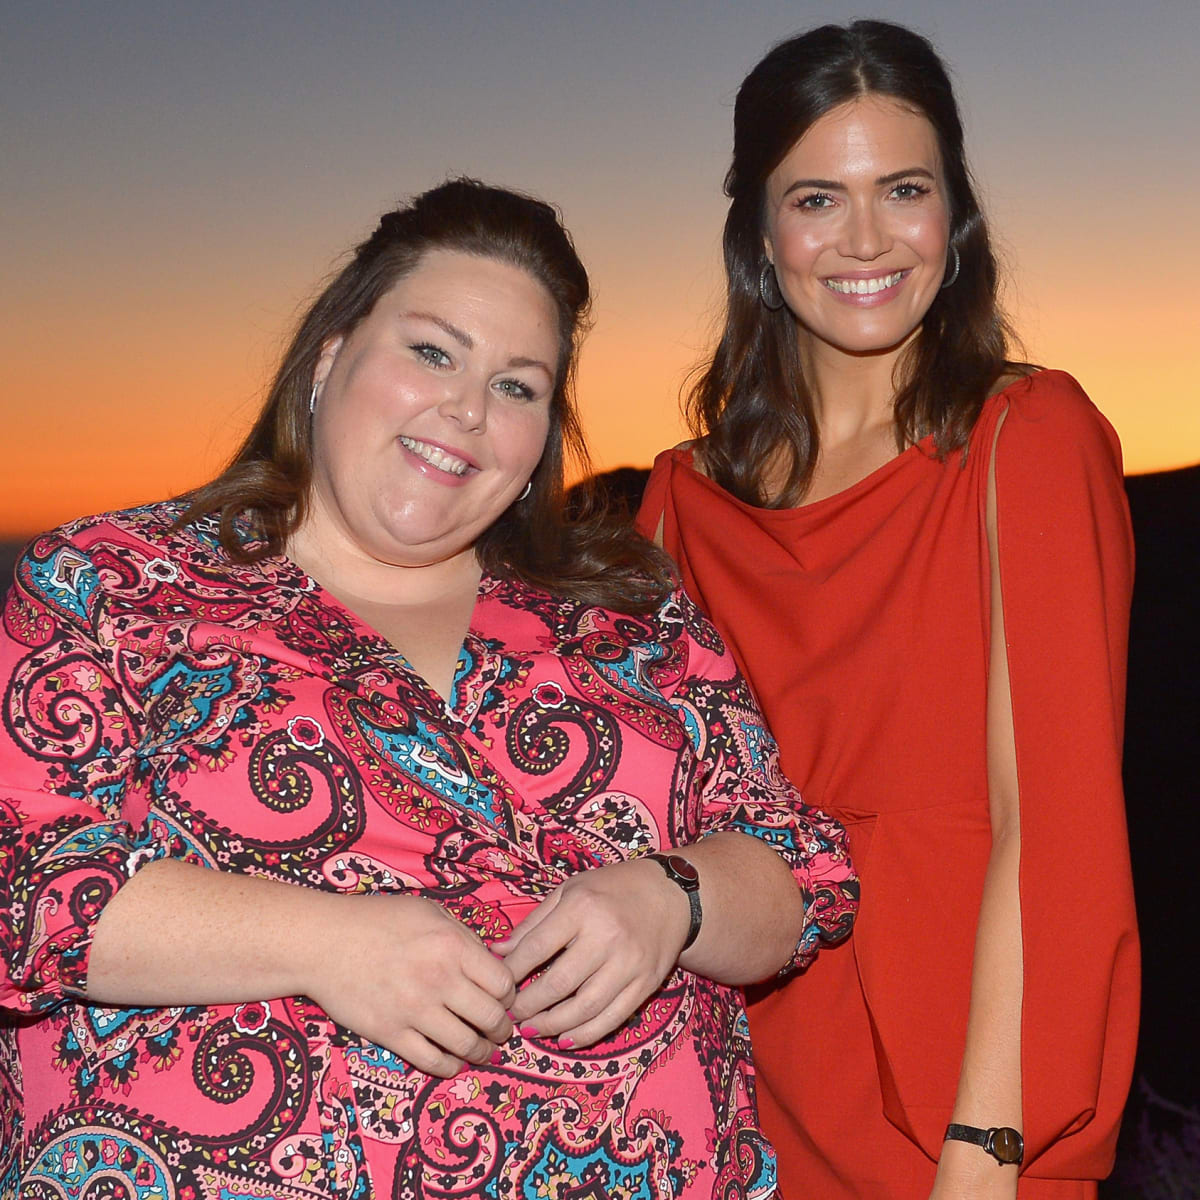 Mandy Moore Drops a Couple of 'This Is Us' and Red Carpet Fashion Spoilers  - Fashionista